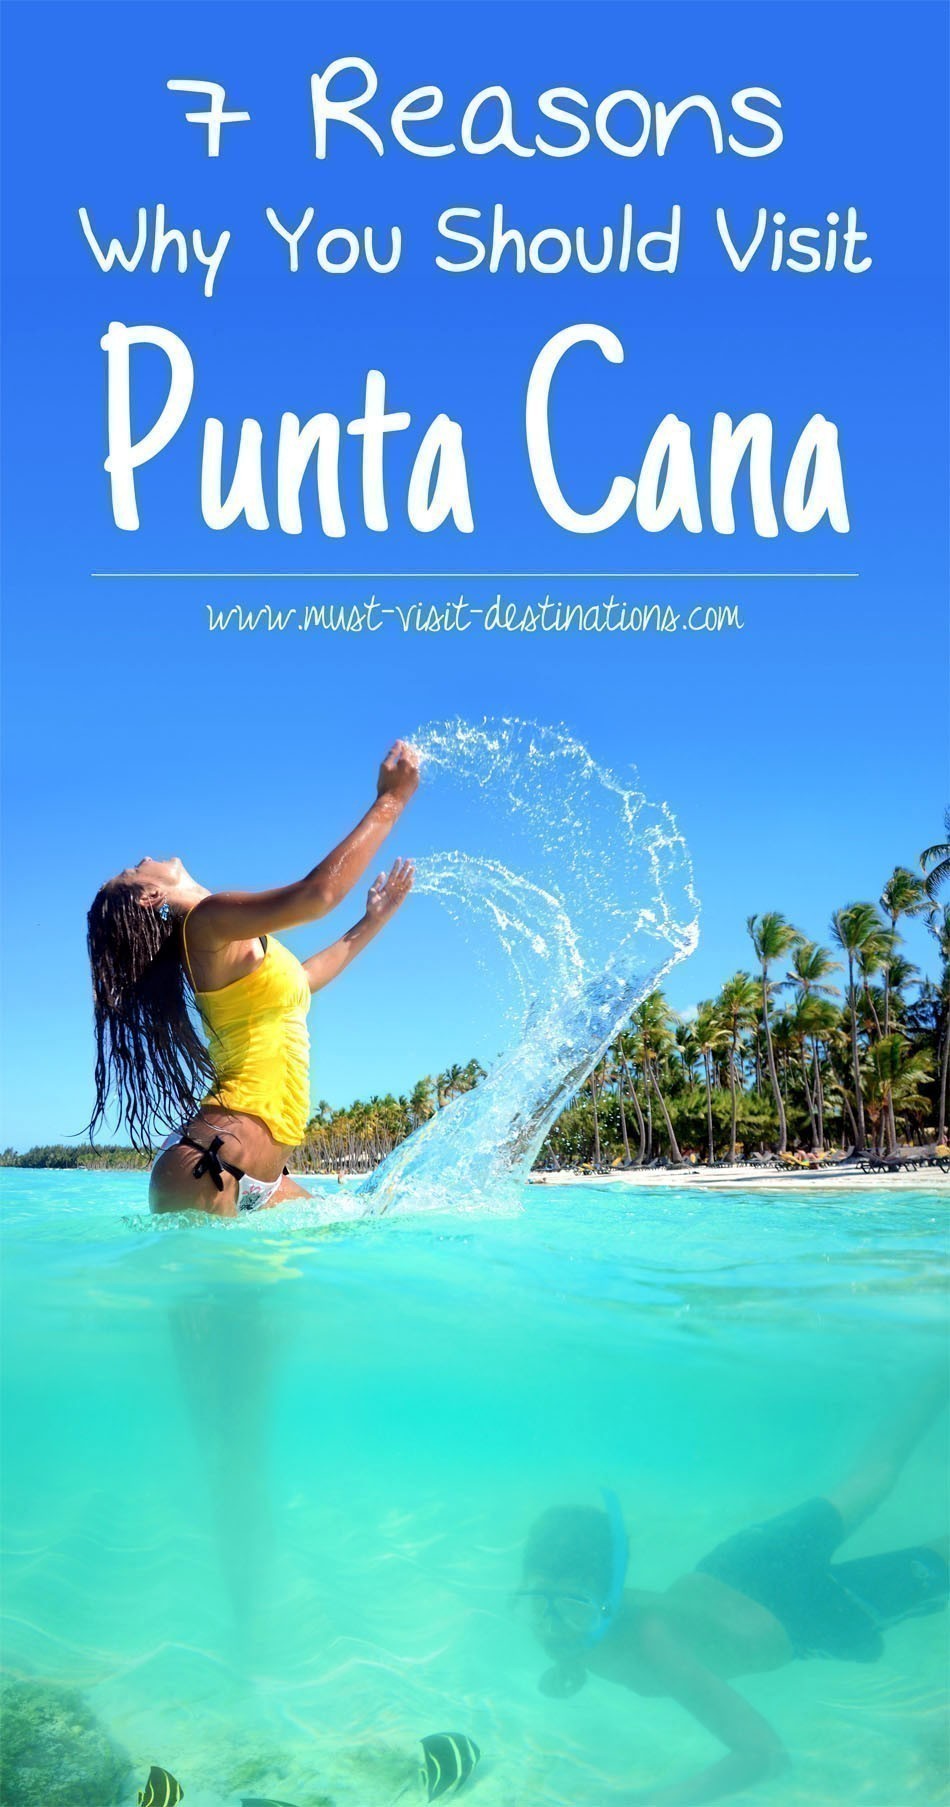 7 Reasons Why You Should Visit Punta Cana #Dominican Republic #travel